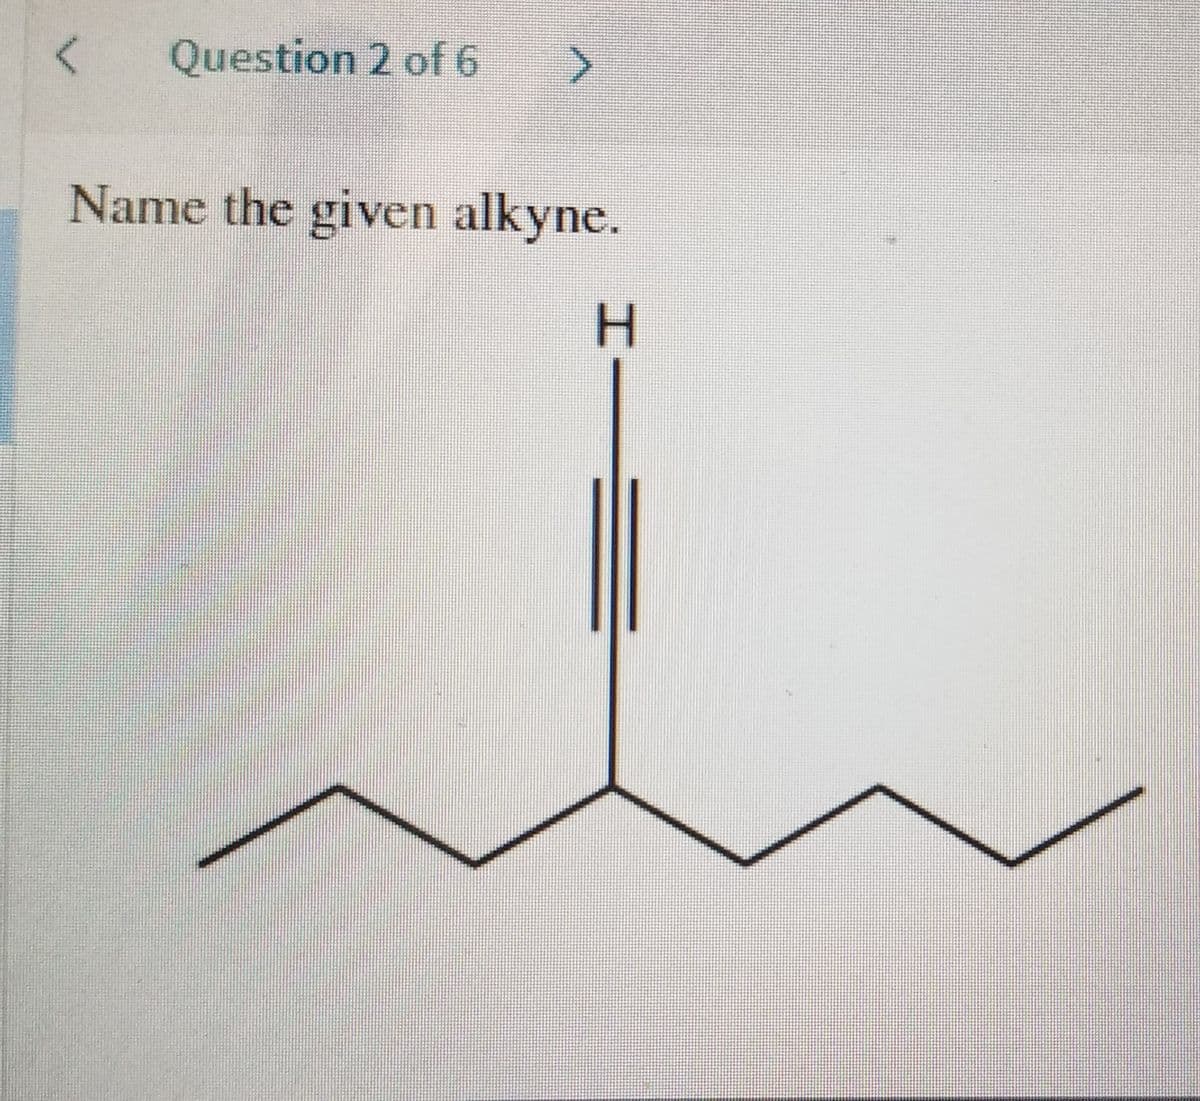 Question 2 of 6
Name the given alkyne.
HII
